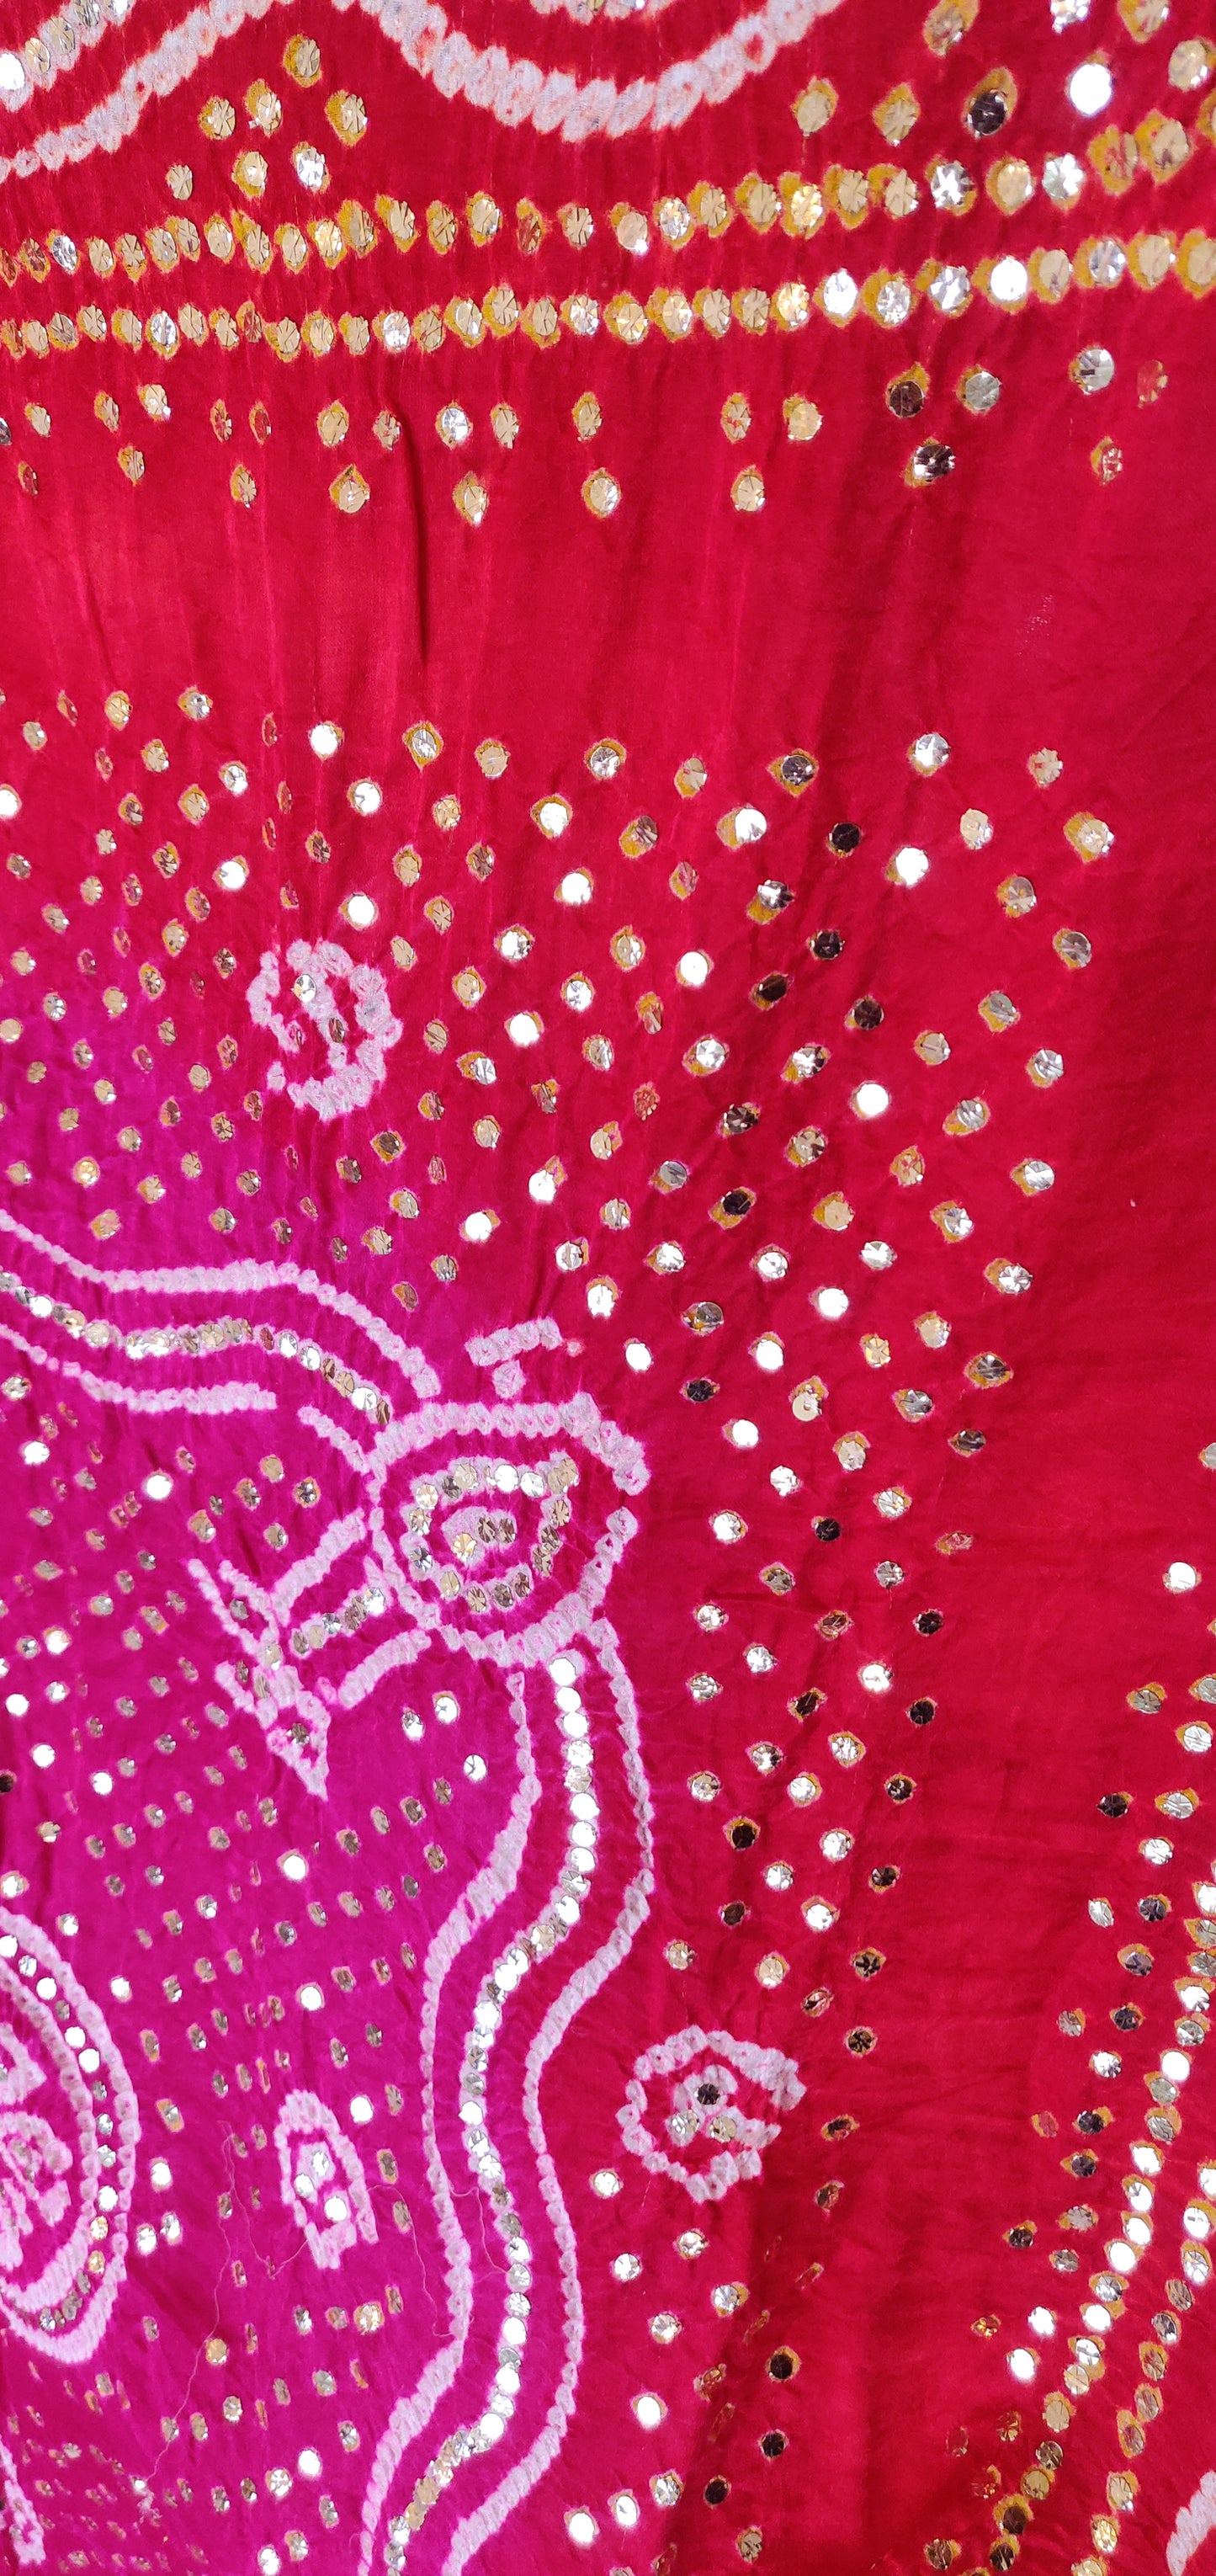 Red and Pink Bandhej Dupatta with Allover Mukaish